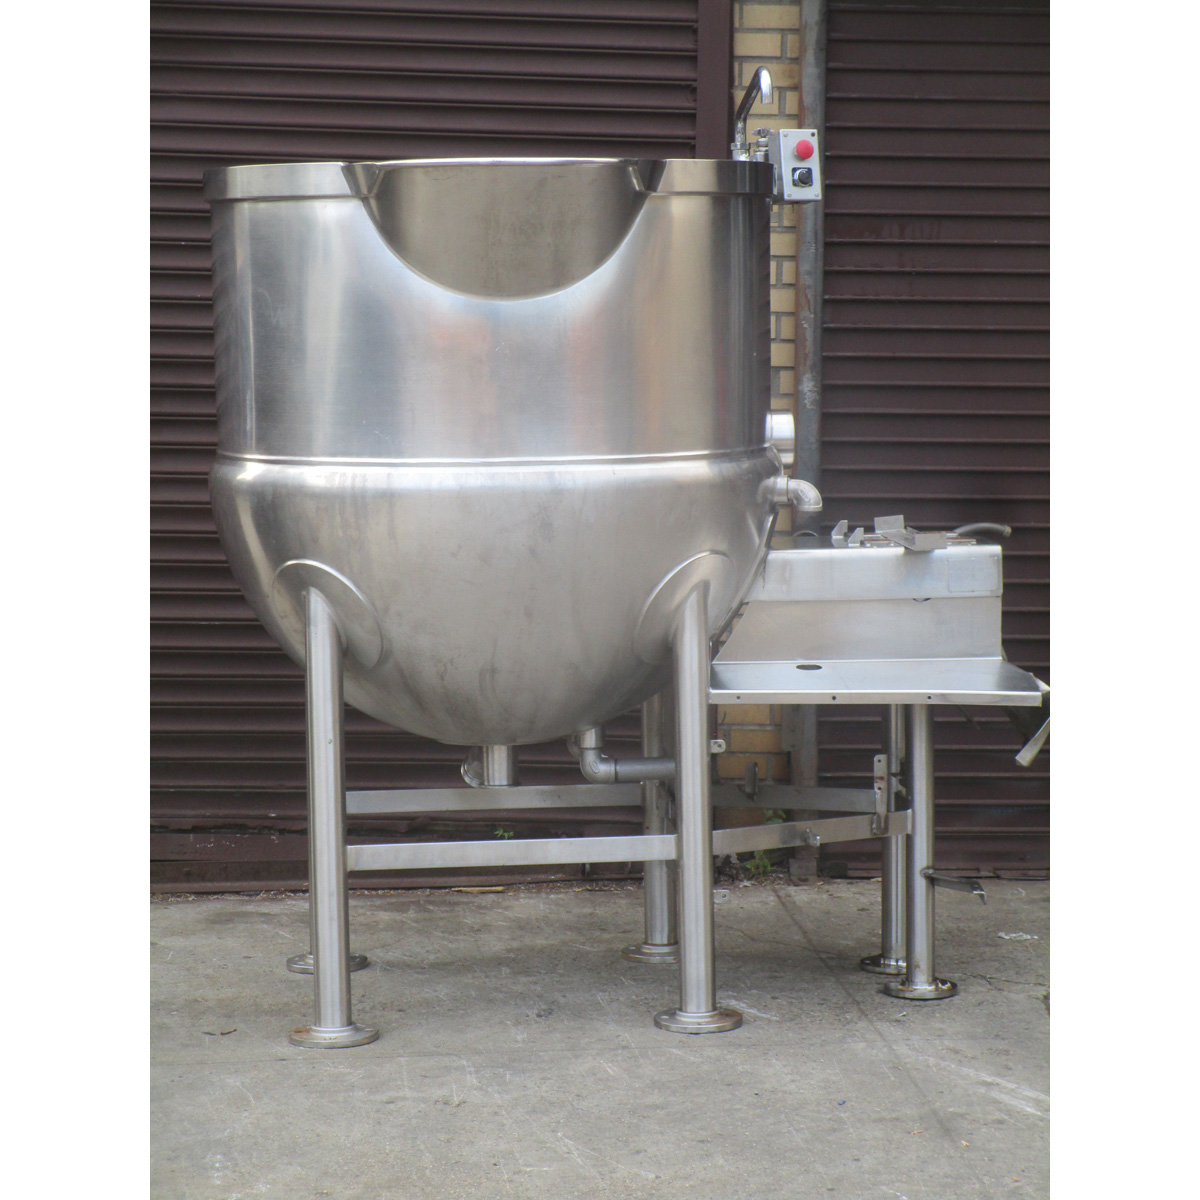 Cleveland HA-MKDL-200-CC 200 Gal Direct Steam Kettle, Body & Control Box, Sold As Is image 2